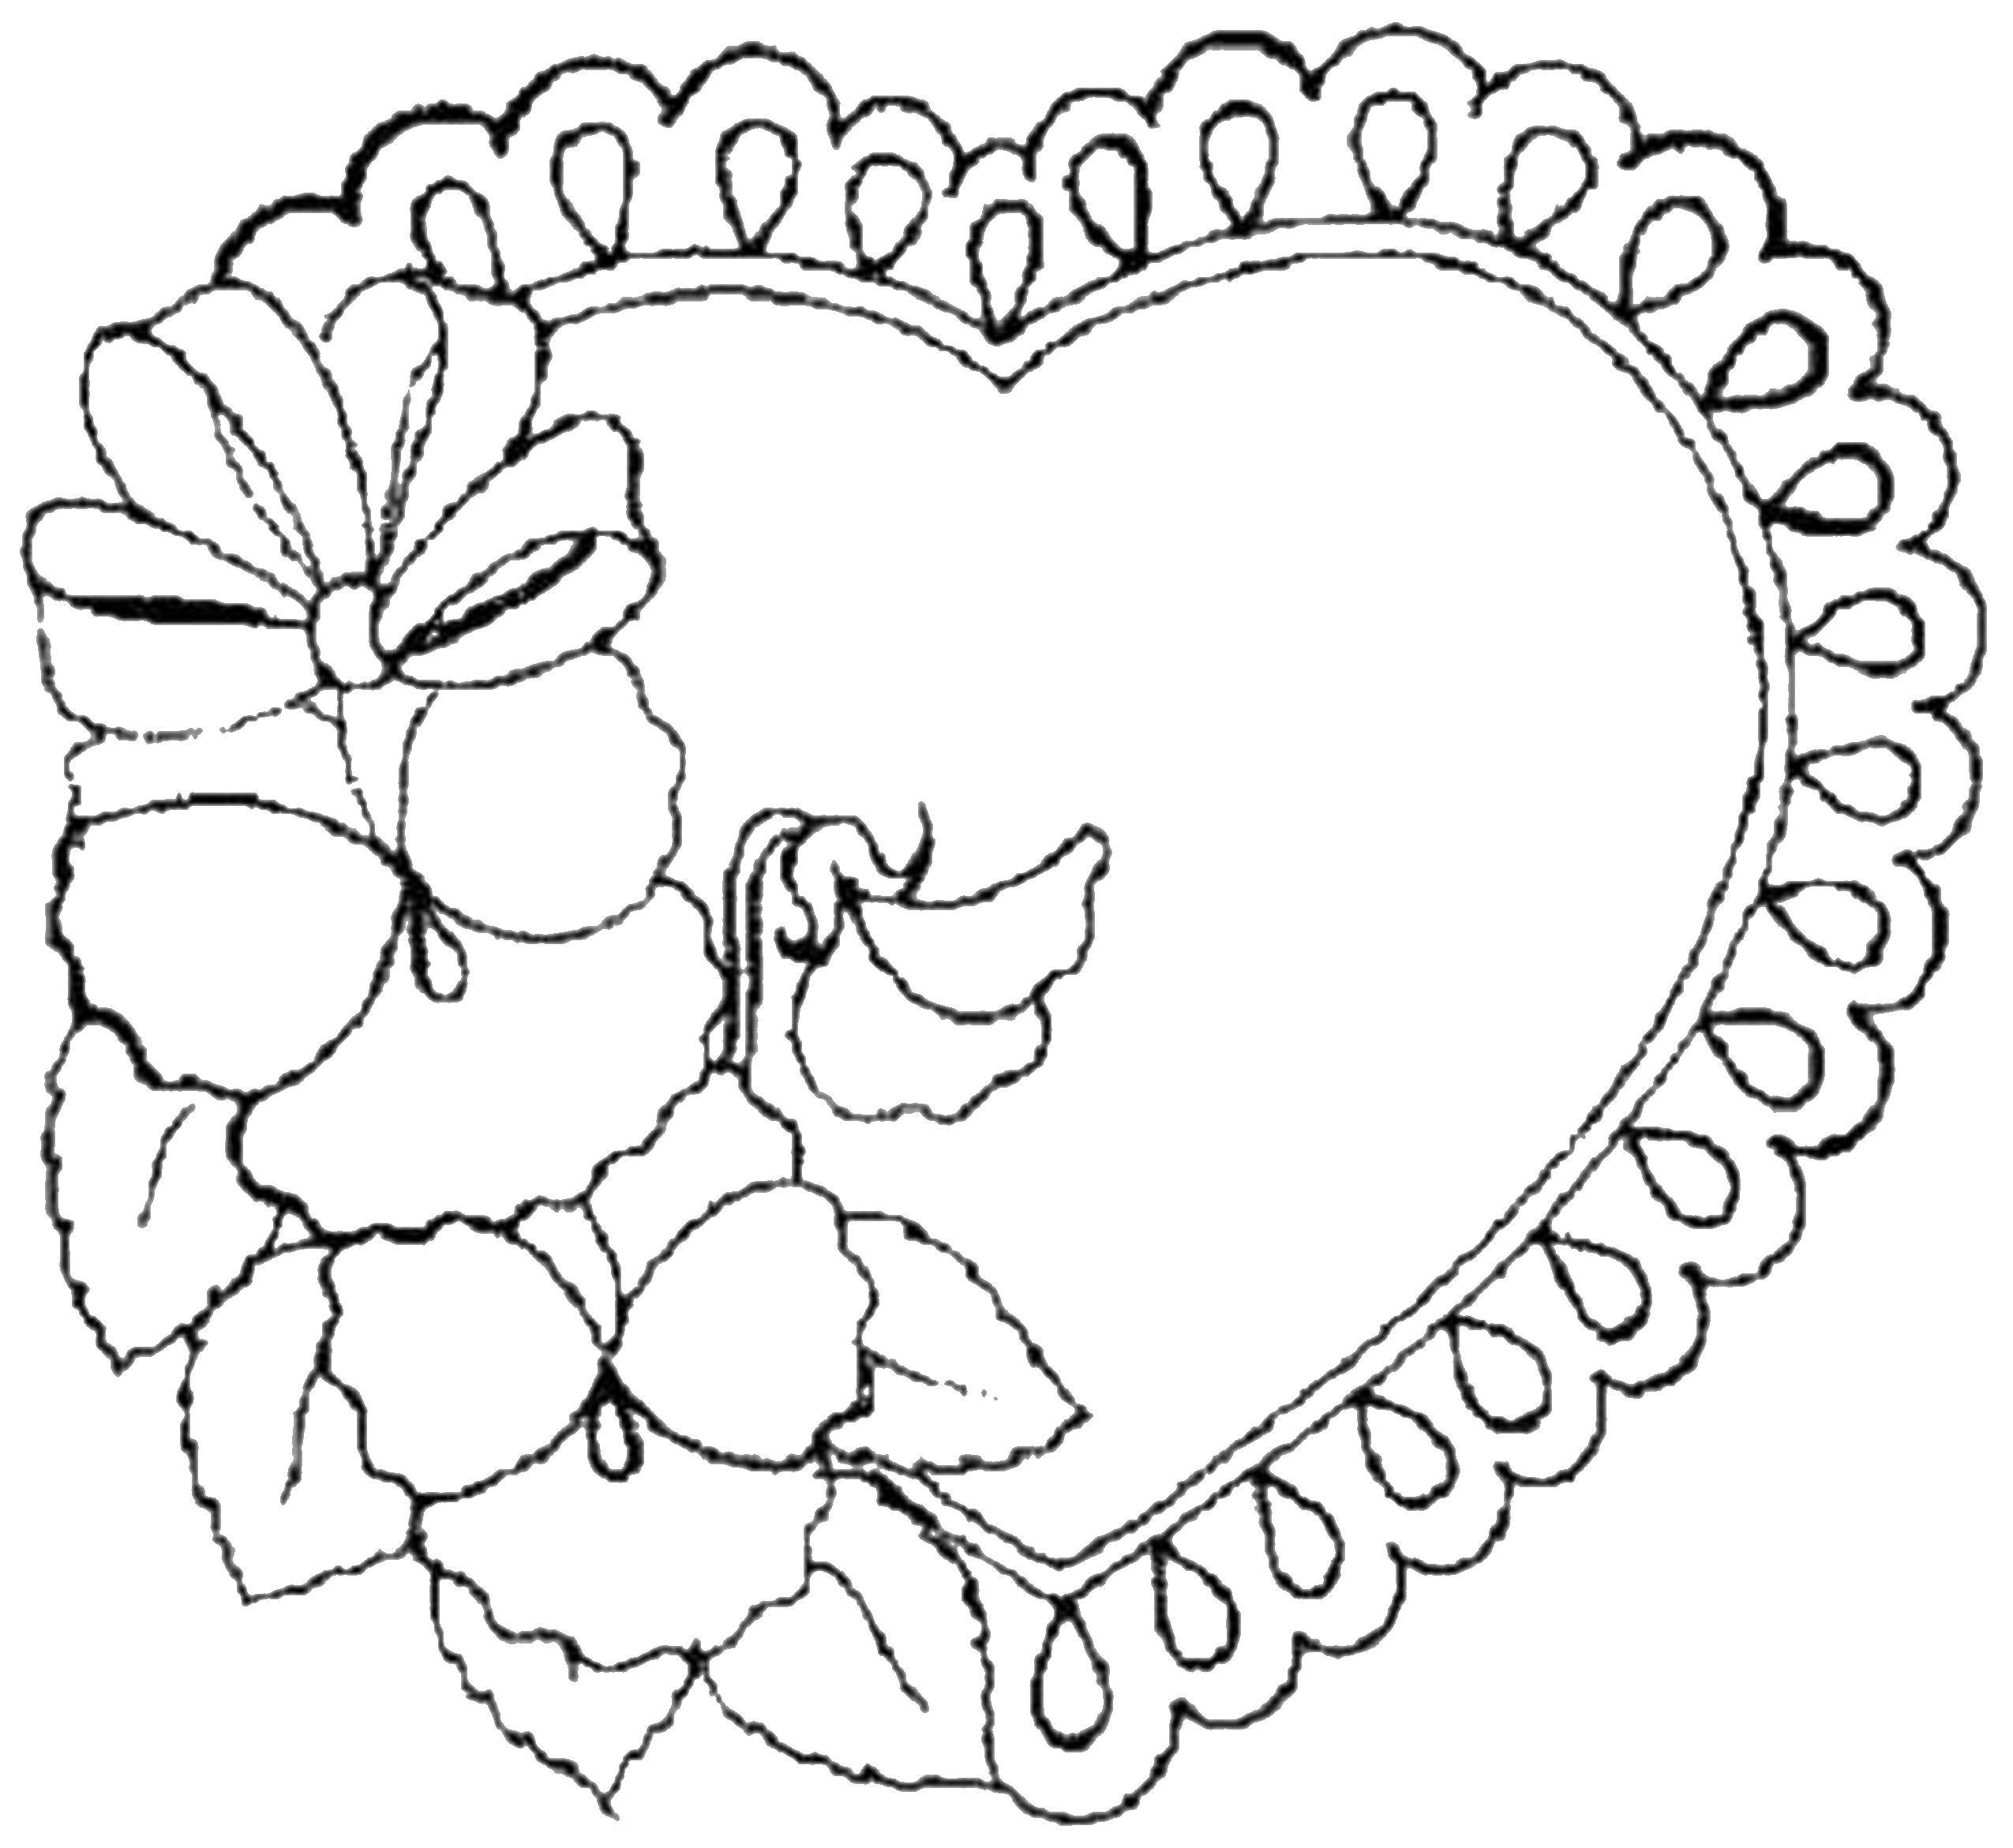 Coloring Lace heart. Category Valentines day. Tags:  Valentines day, love, heart.